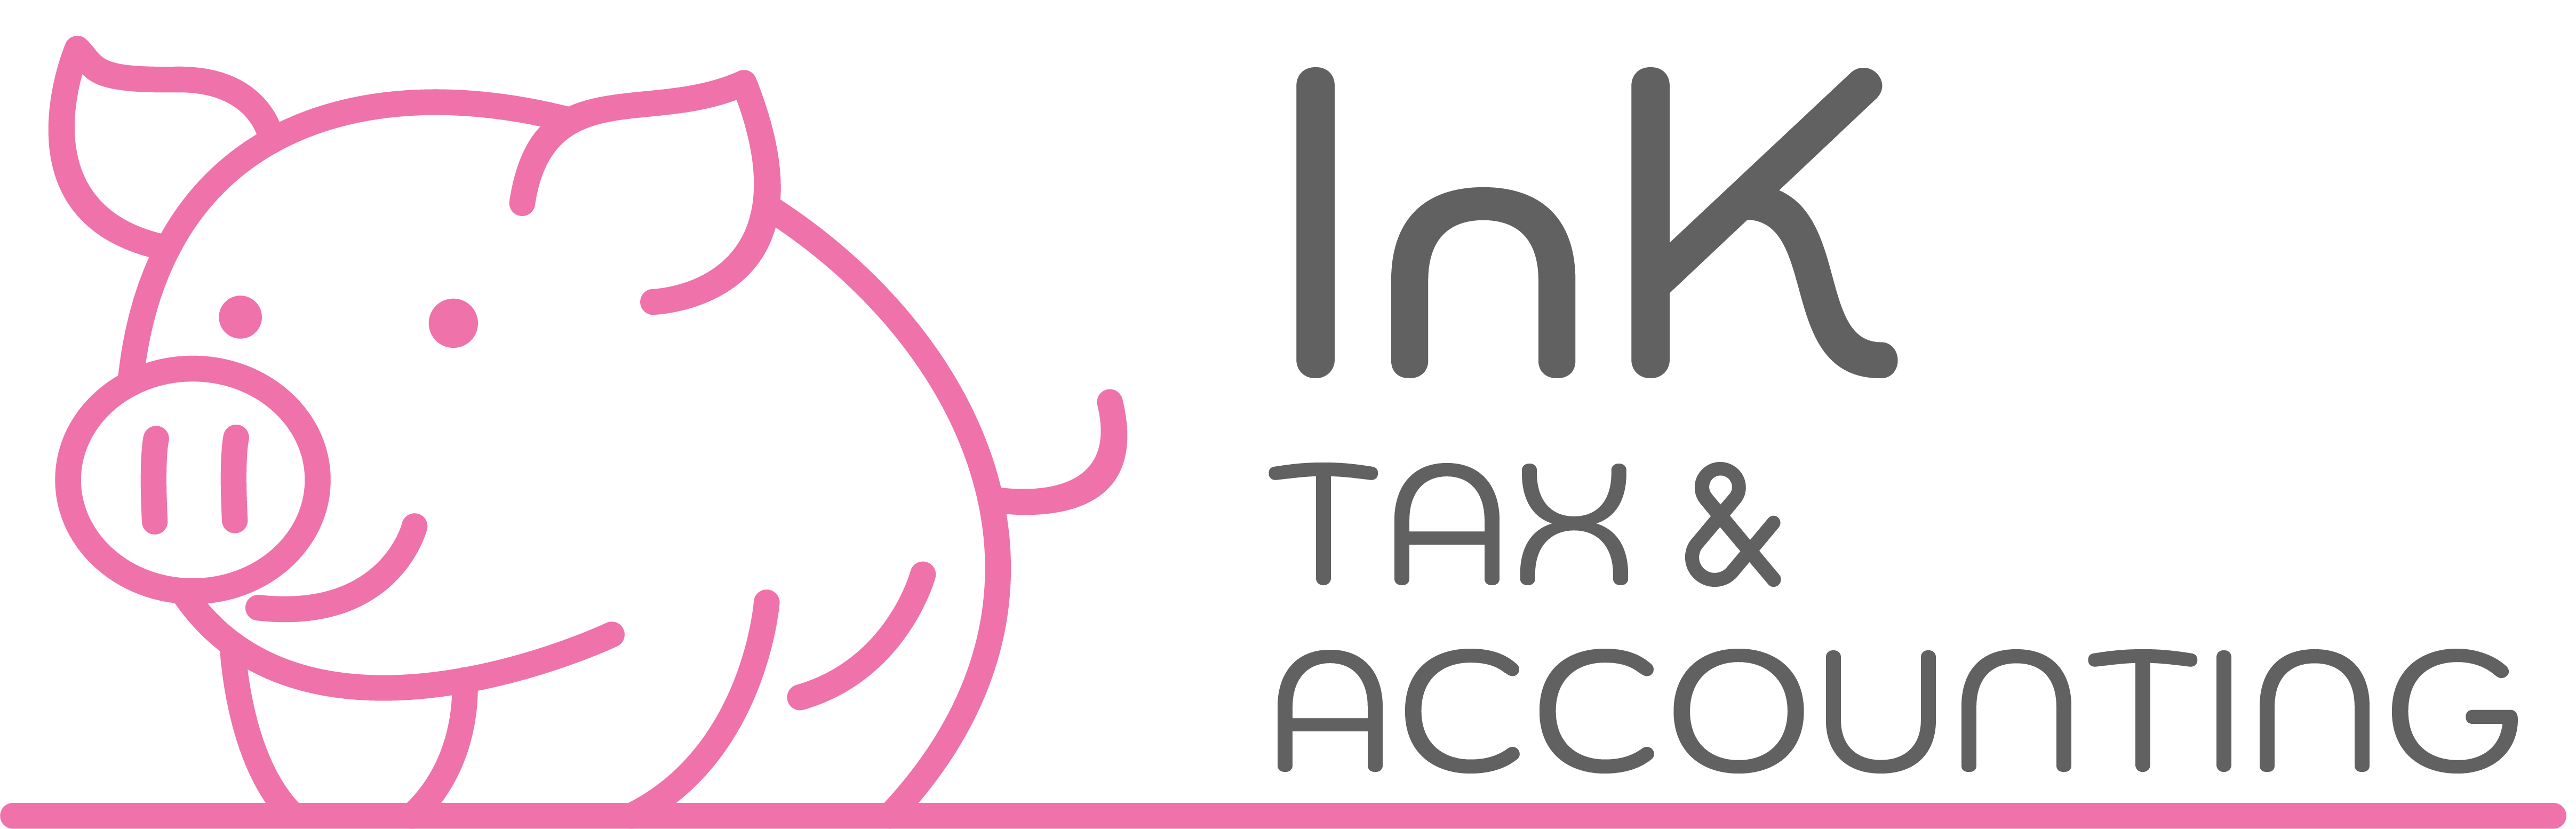 InK Tax & Accounting Service